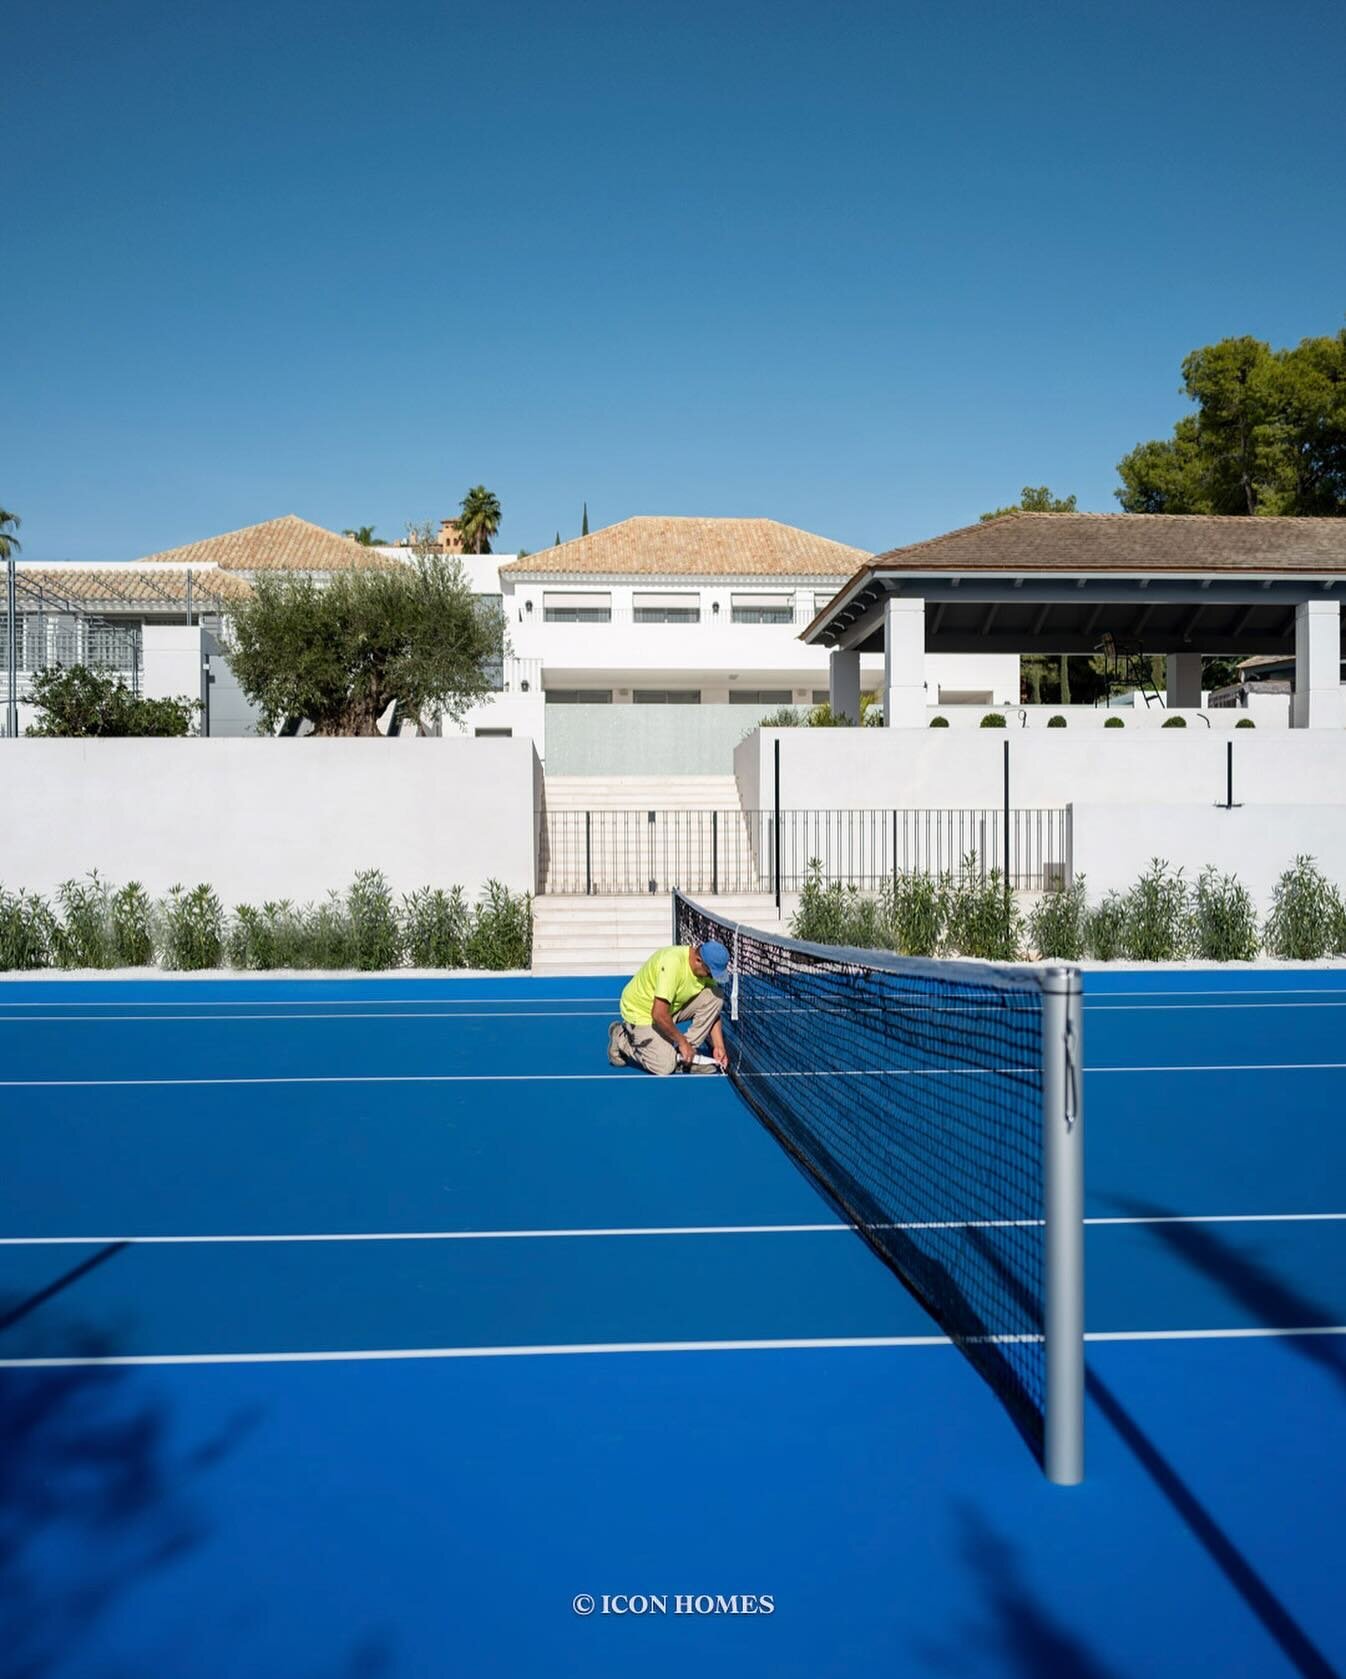 Proper centre court in the making&hellip;. Part five

#Iconhomes #iconmarbella #icon #homes #conceptdesign #interiordesign #iconjournal #luxuryproperty #invest #crafting #property #propertyinvestor #propertydeveloper #advisor #architecture #design #d